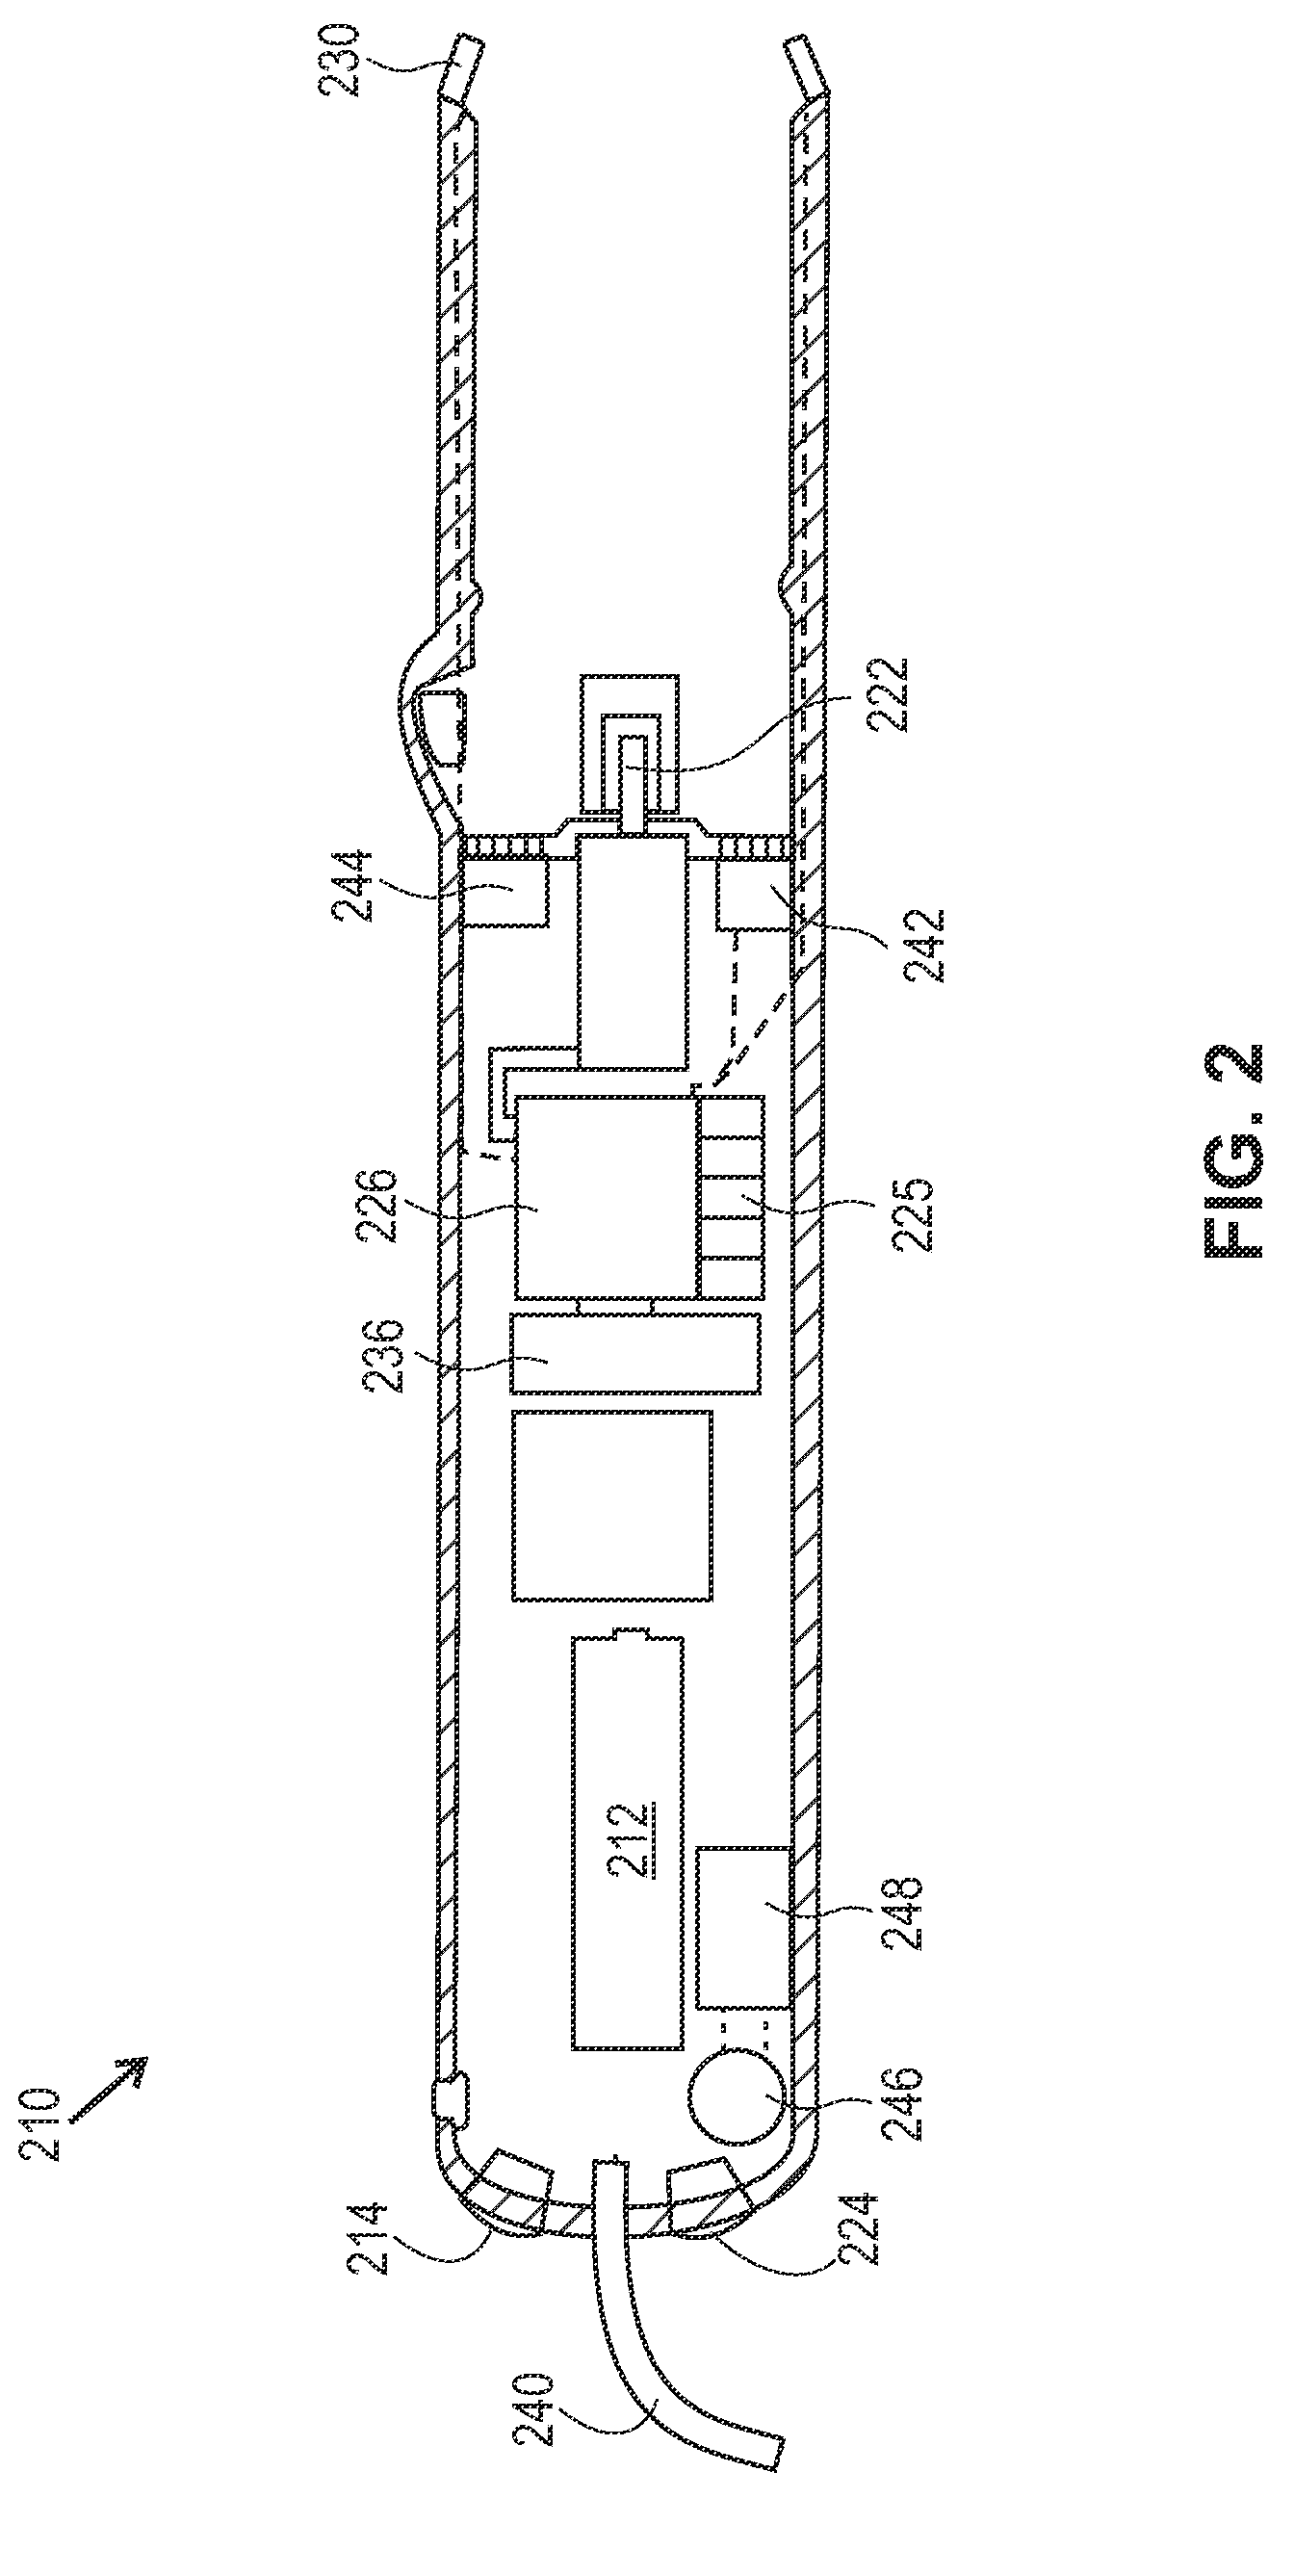 Methods and apparatus for art supply useage compliance